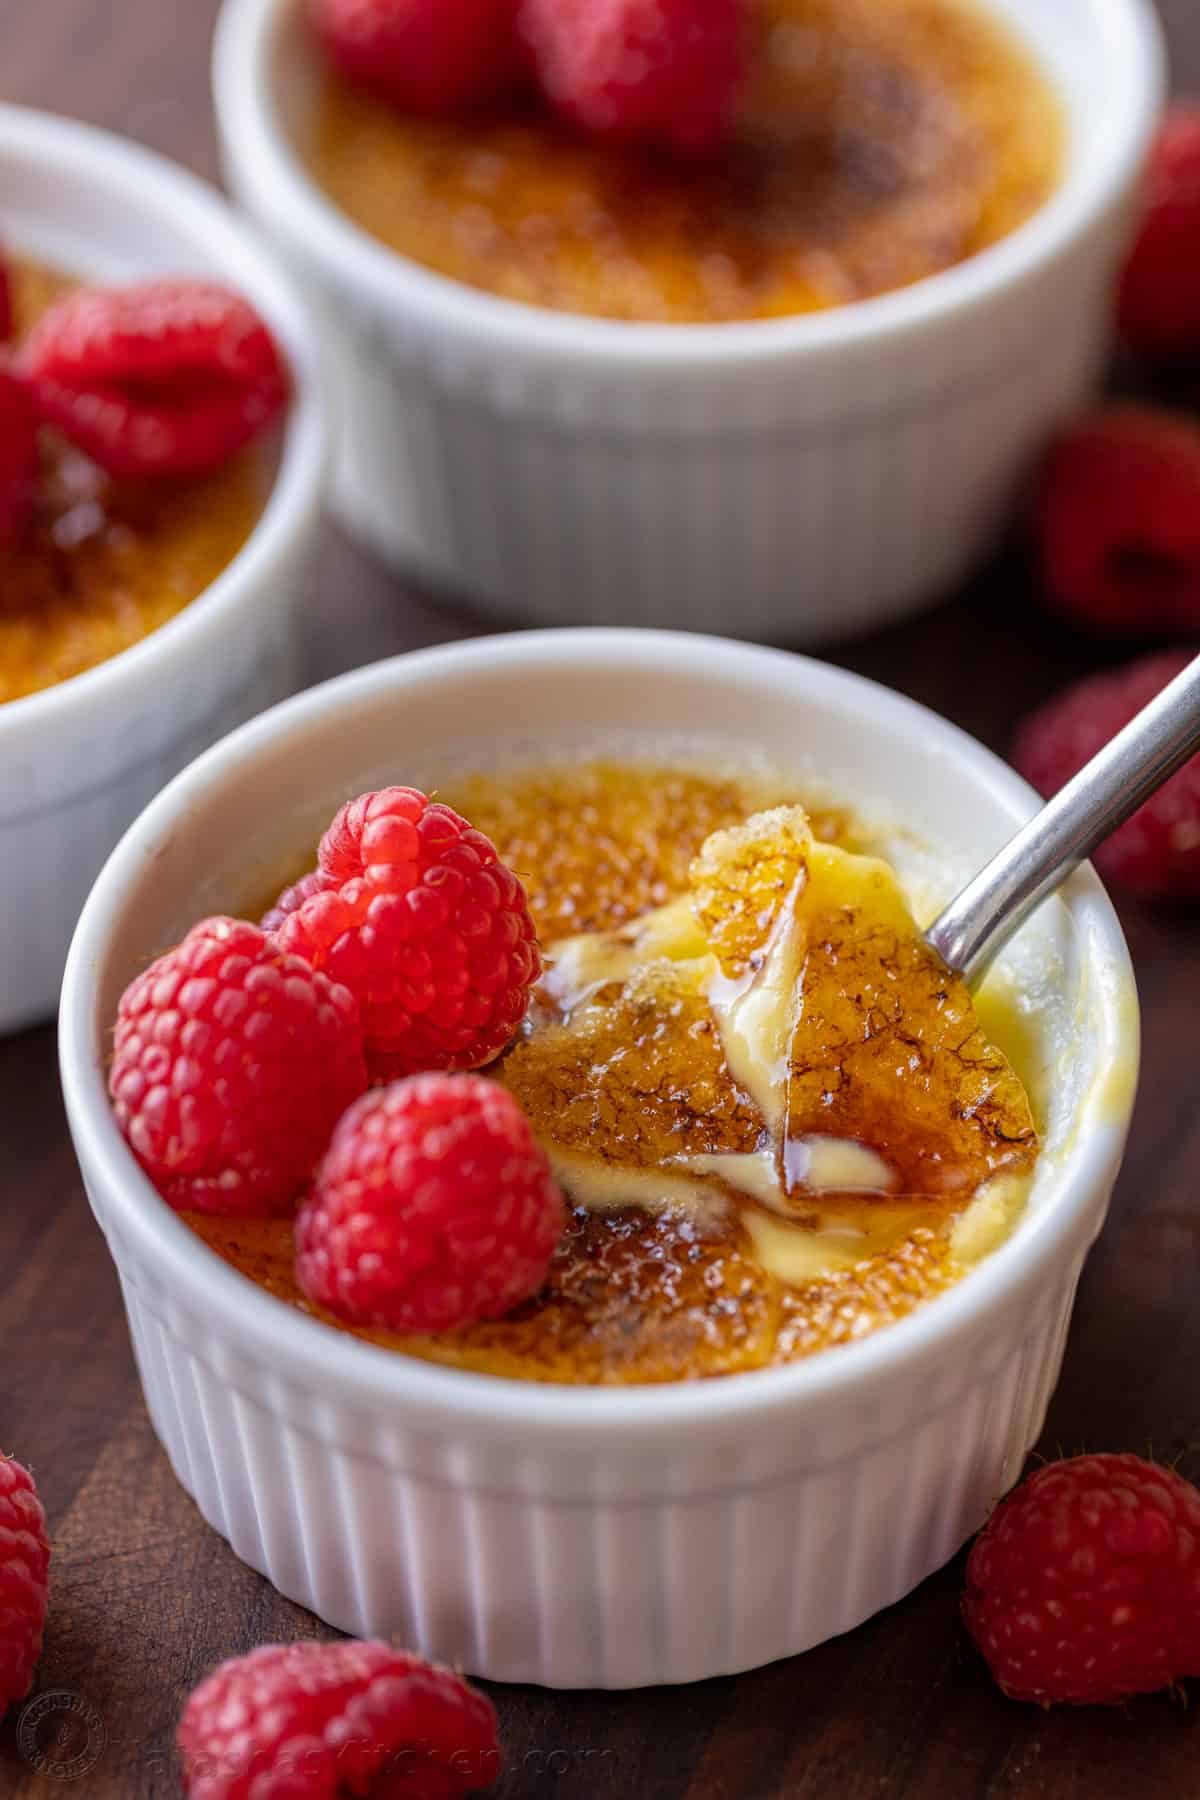 Creme brulee topped with raspberries, with the caramelized sugar topping cracked with a spoon.